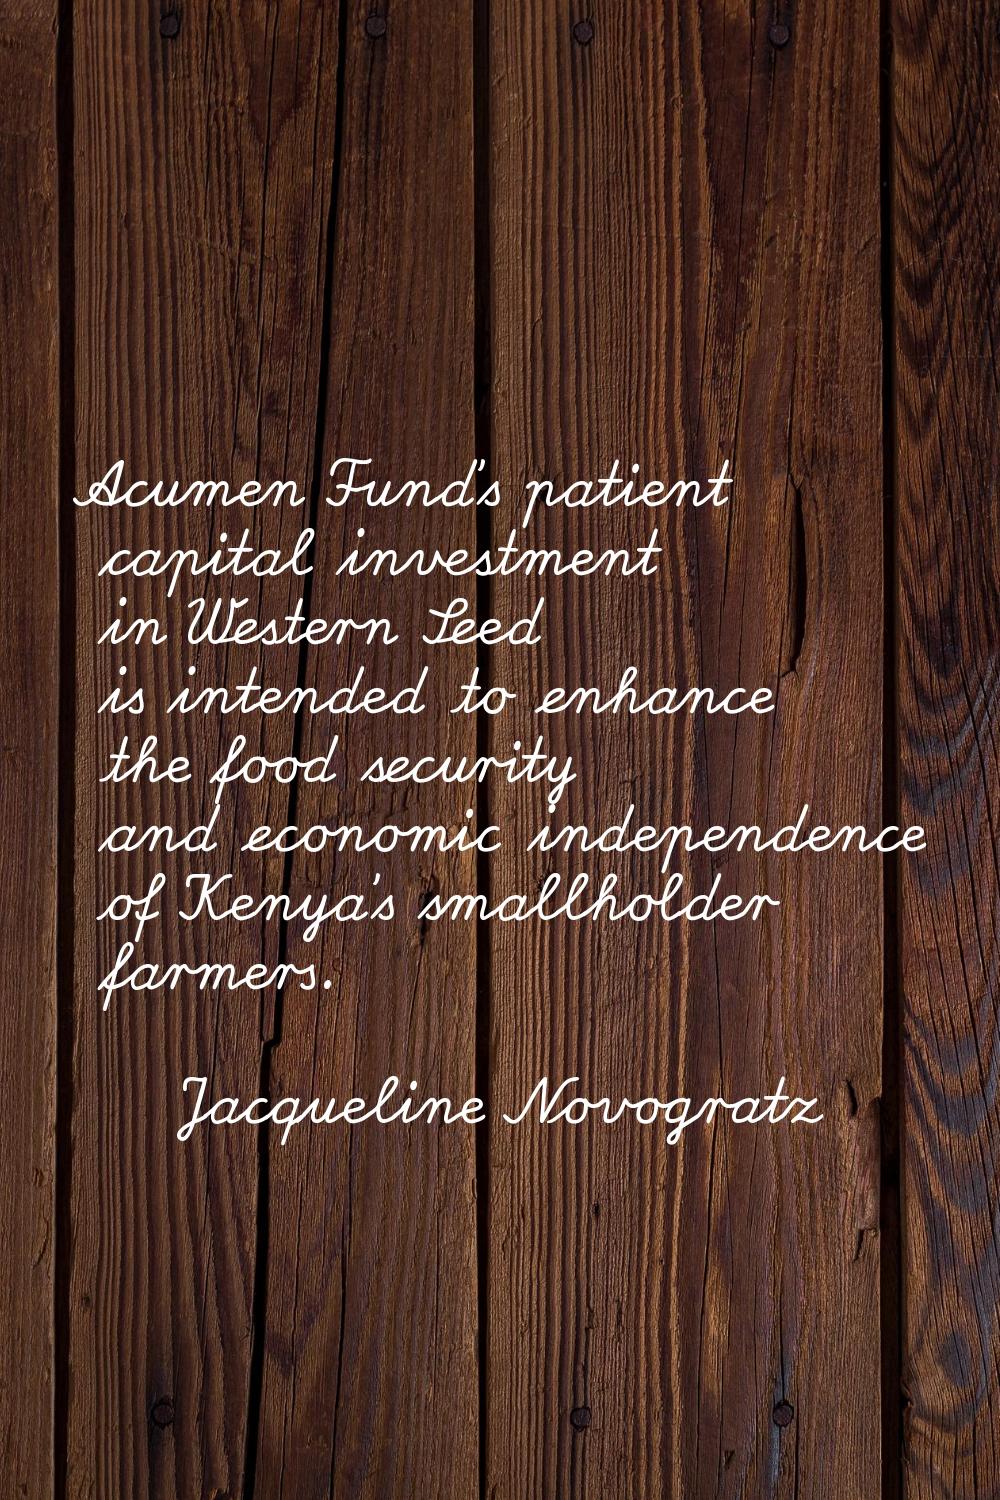 Acumen Fund's patient capital investment in Western Seed is intended to enhance the food security a